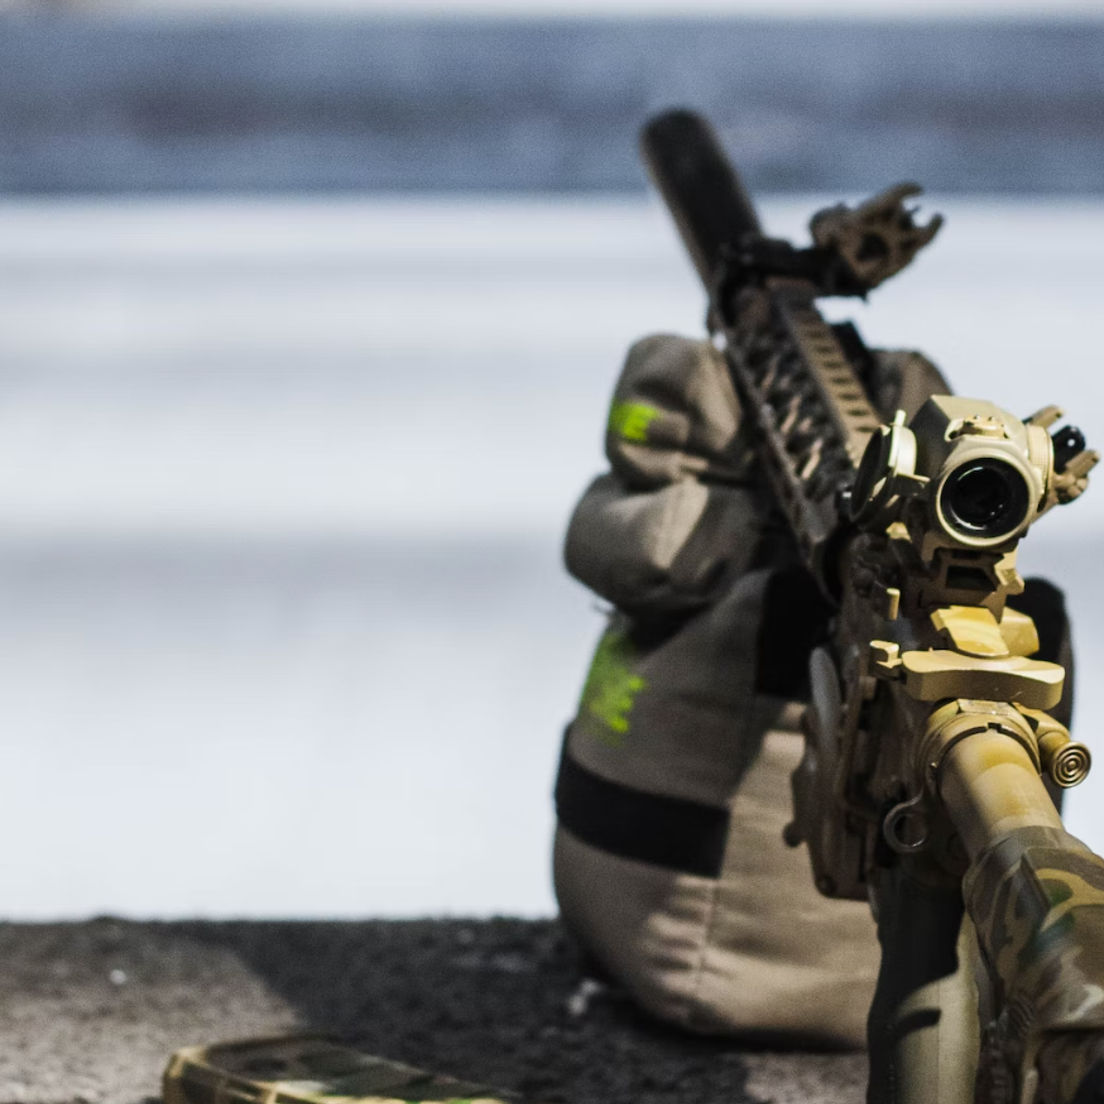 Stand supervision on shooting ranges - the most important info